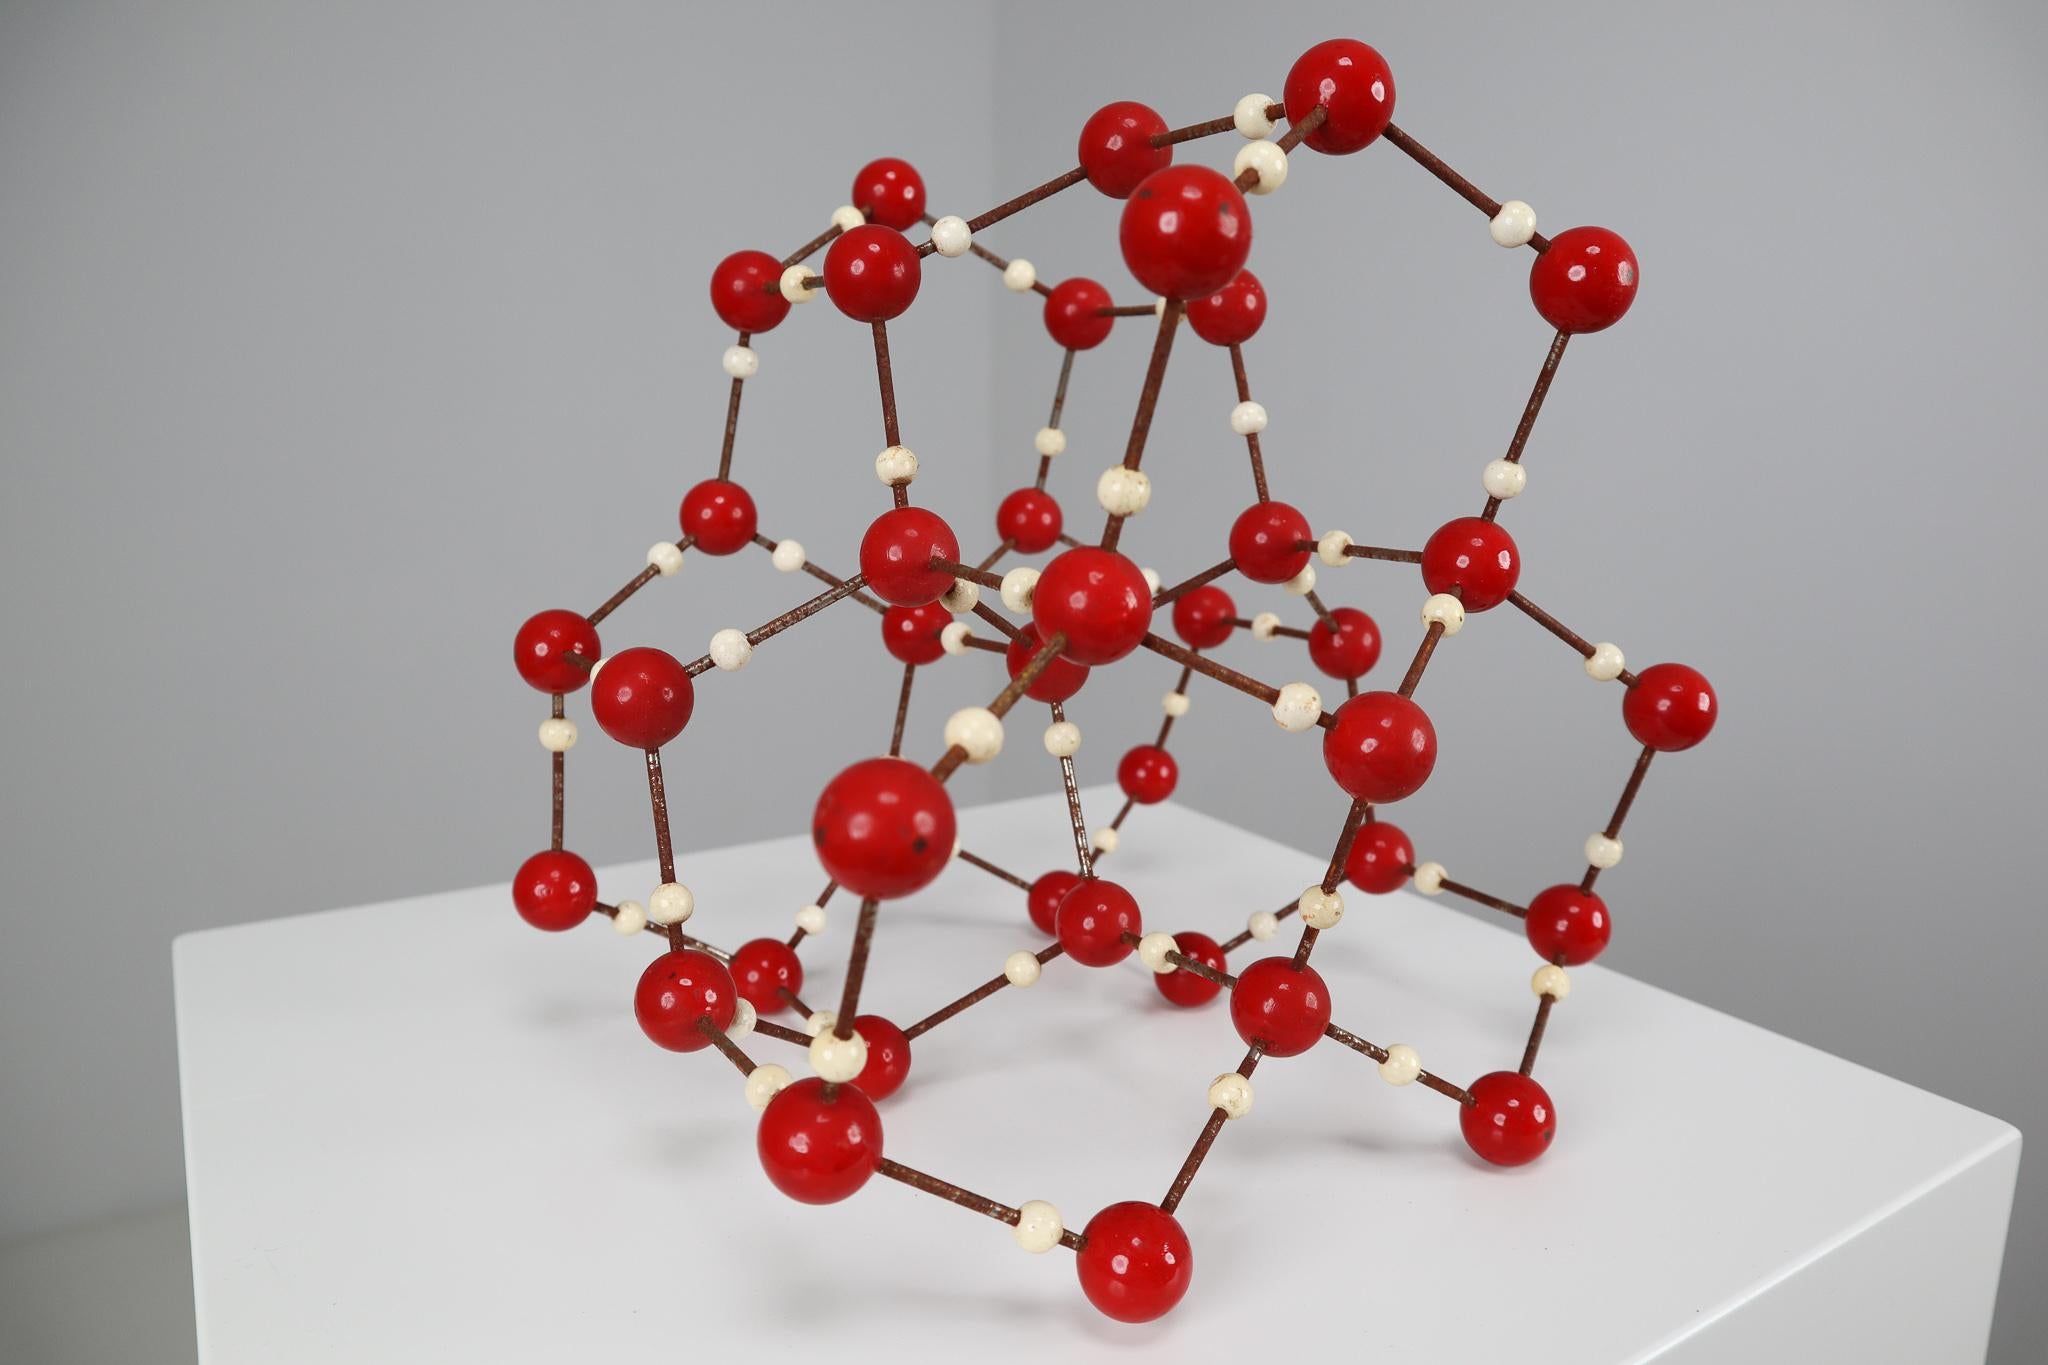 European Midcentury Molecular Structure for Didactic Purposes Made in the 1950s